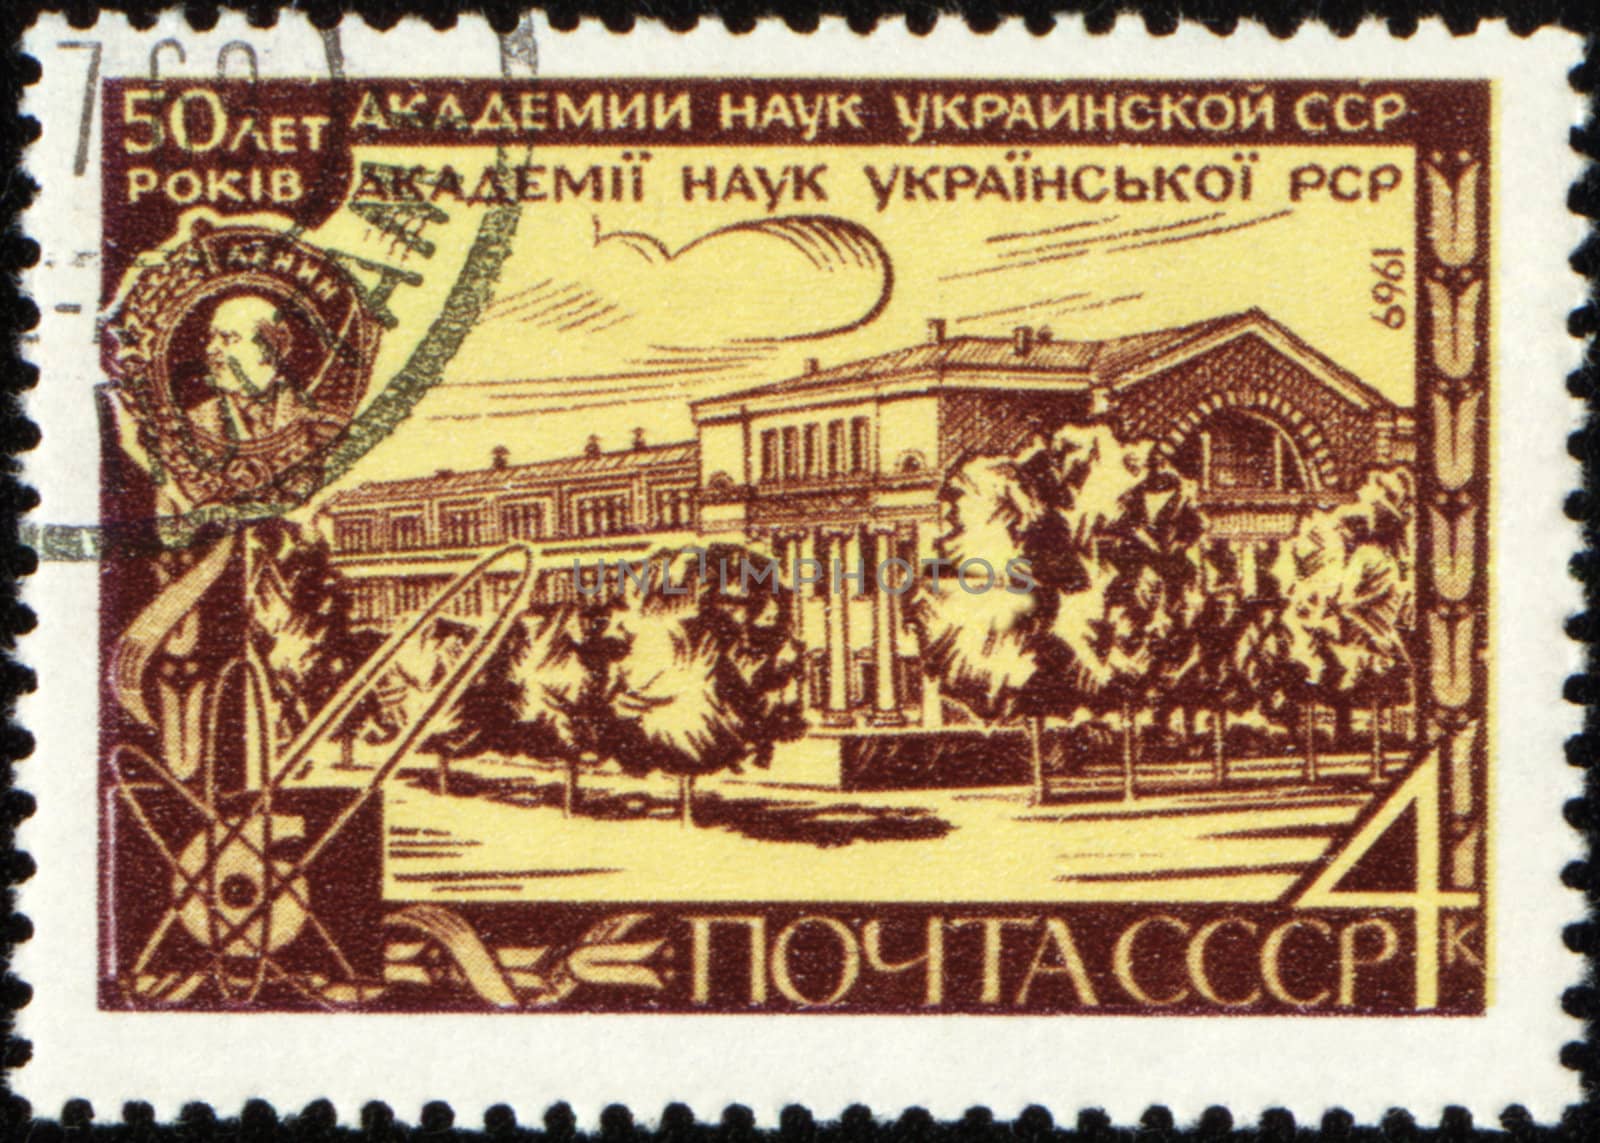 USSR - CIRCA 1969: a stamp printed in USSR devoted to 50th anniversary of Academy of Sciences of Ukraine, circa 1969